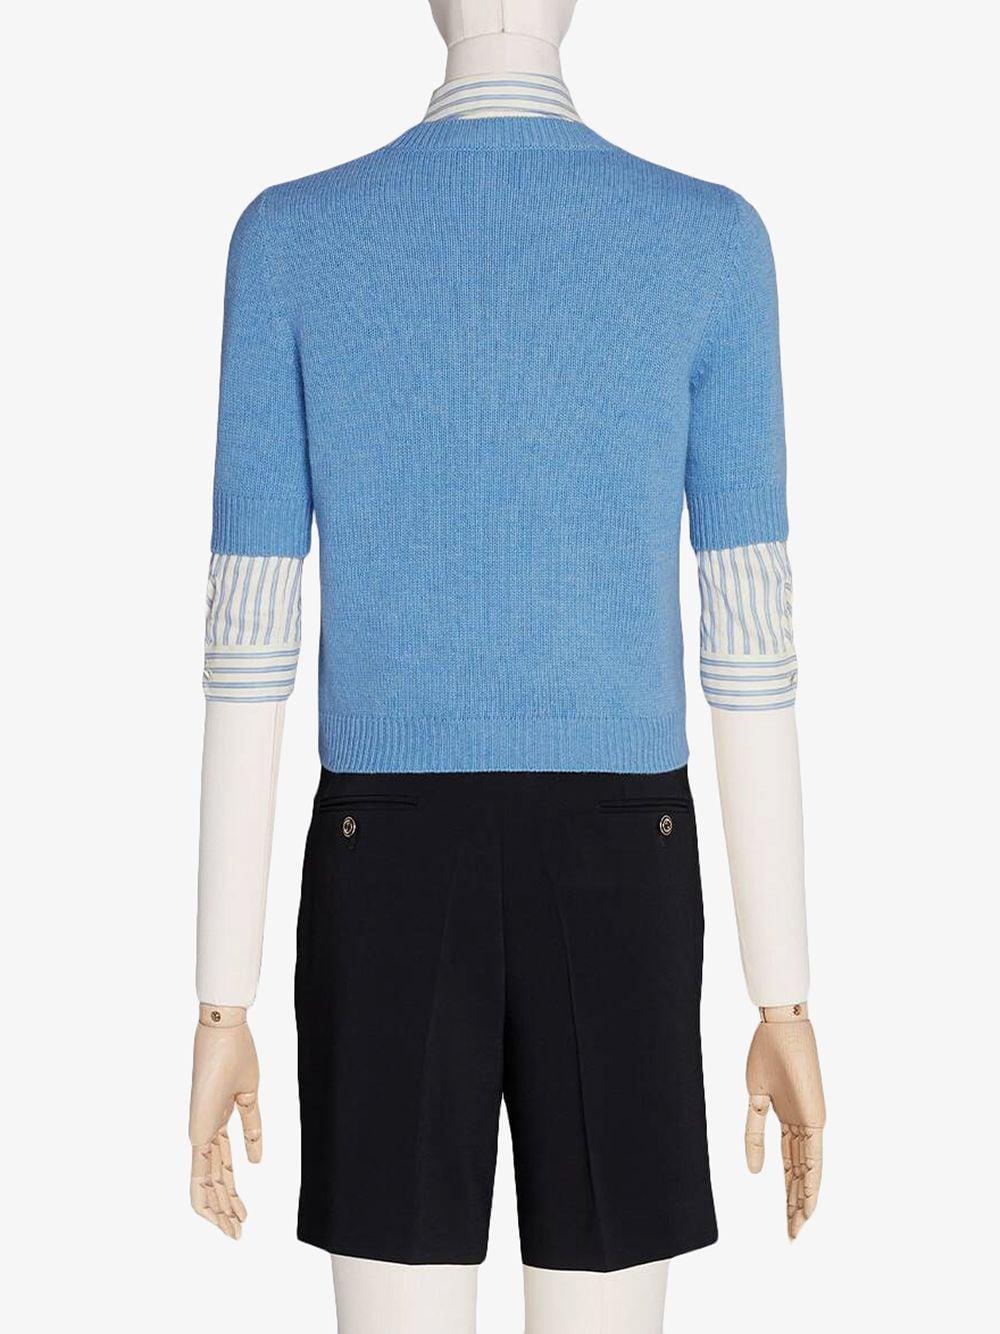 Gucci Beverly Hills Cherries Intarsia-knit Top in Blue | Lyst